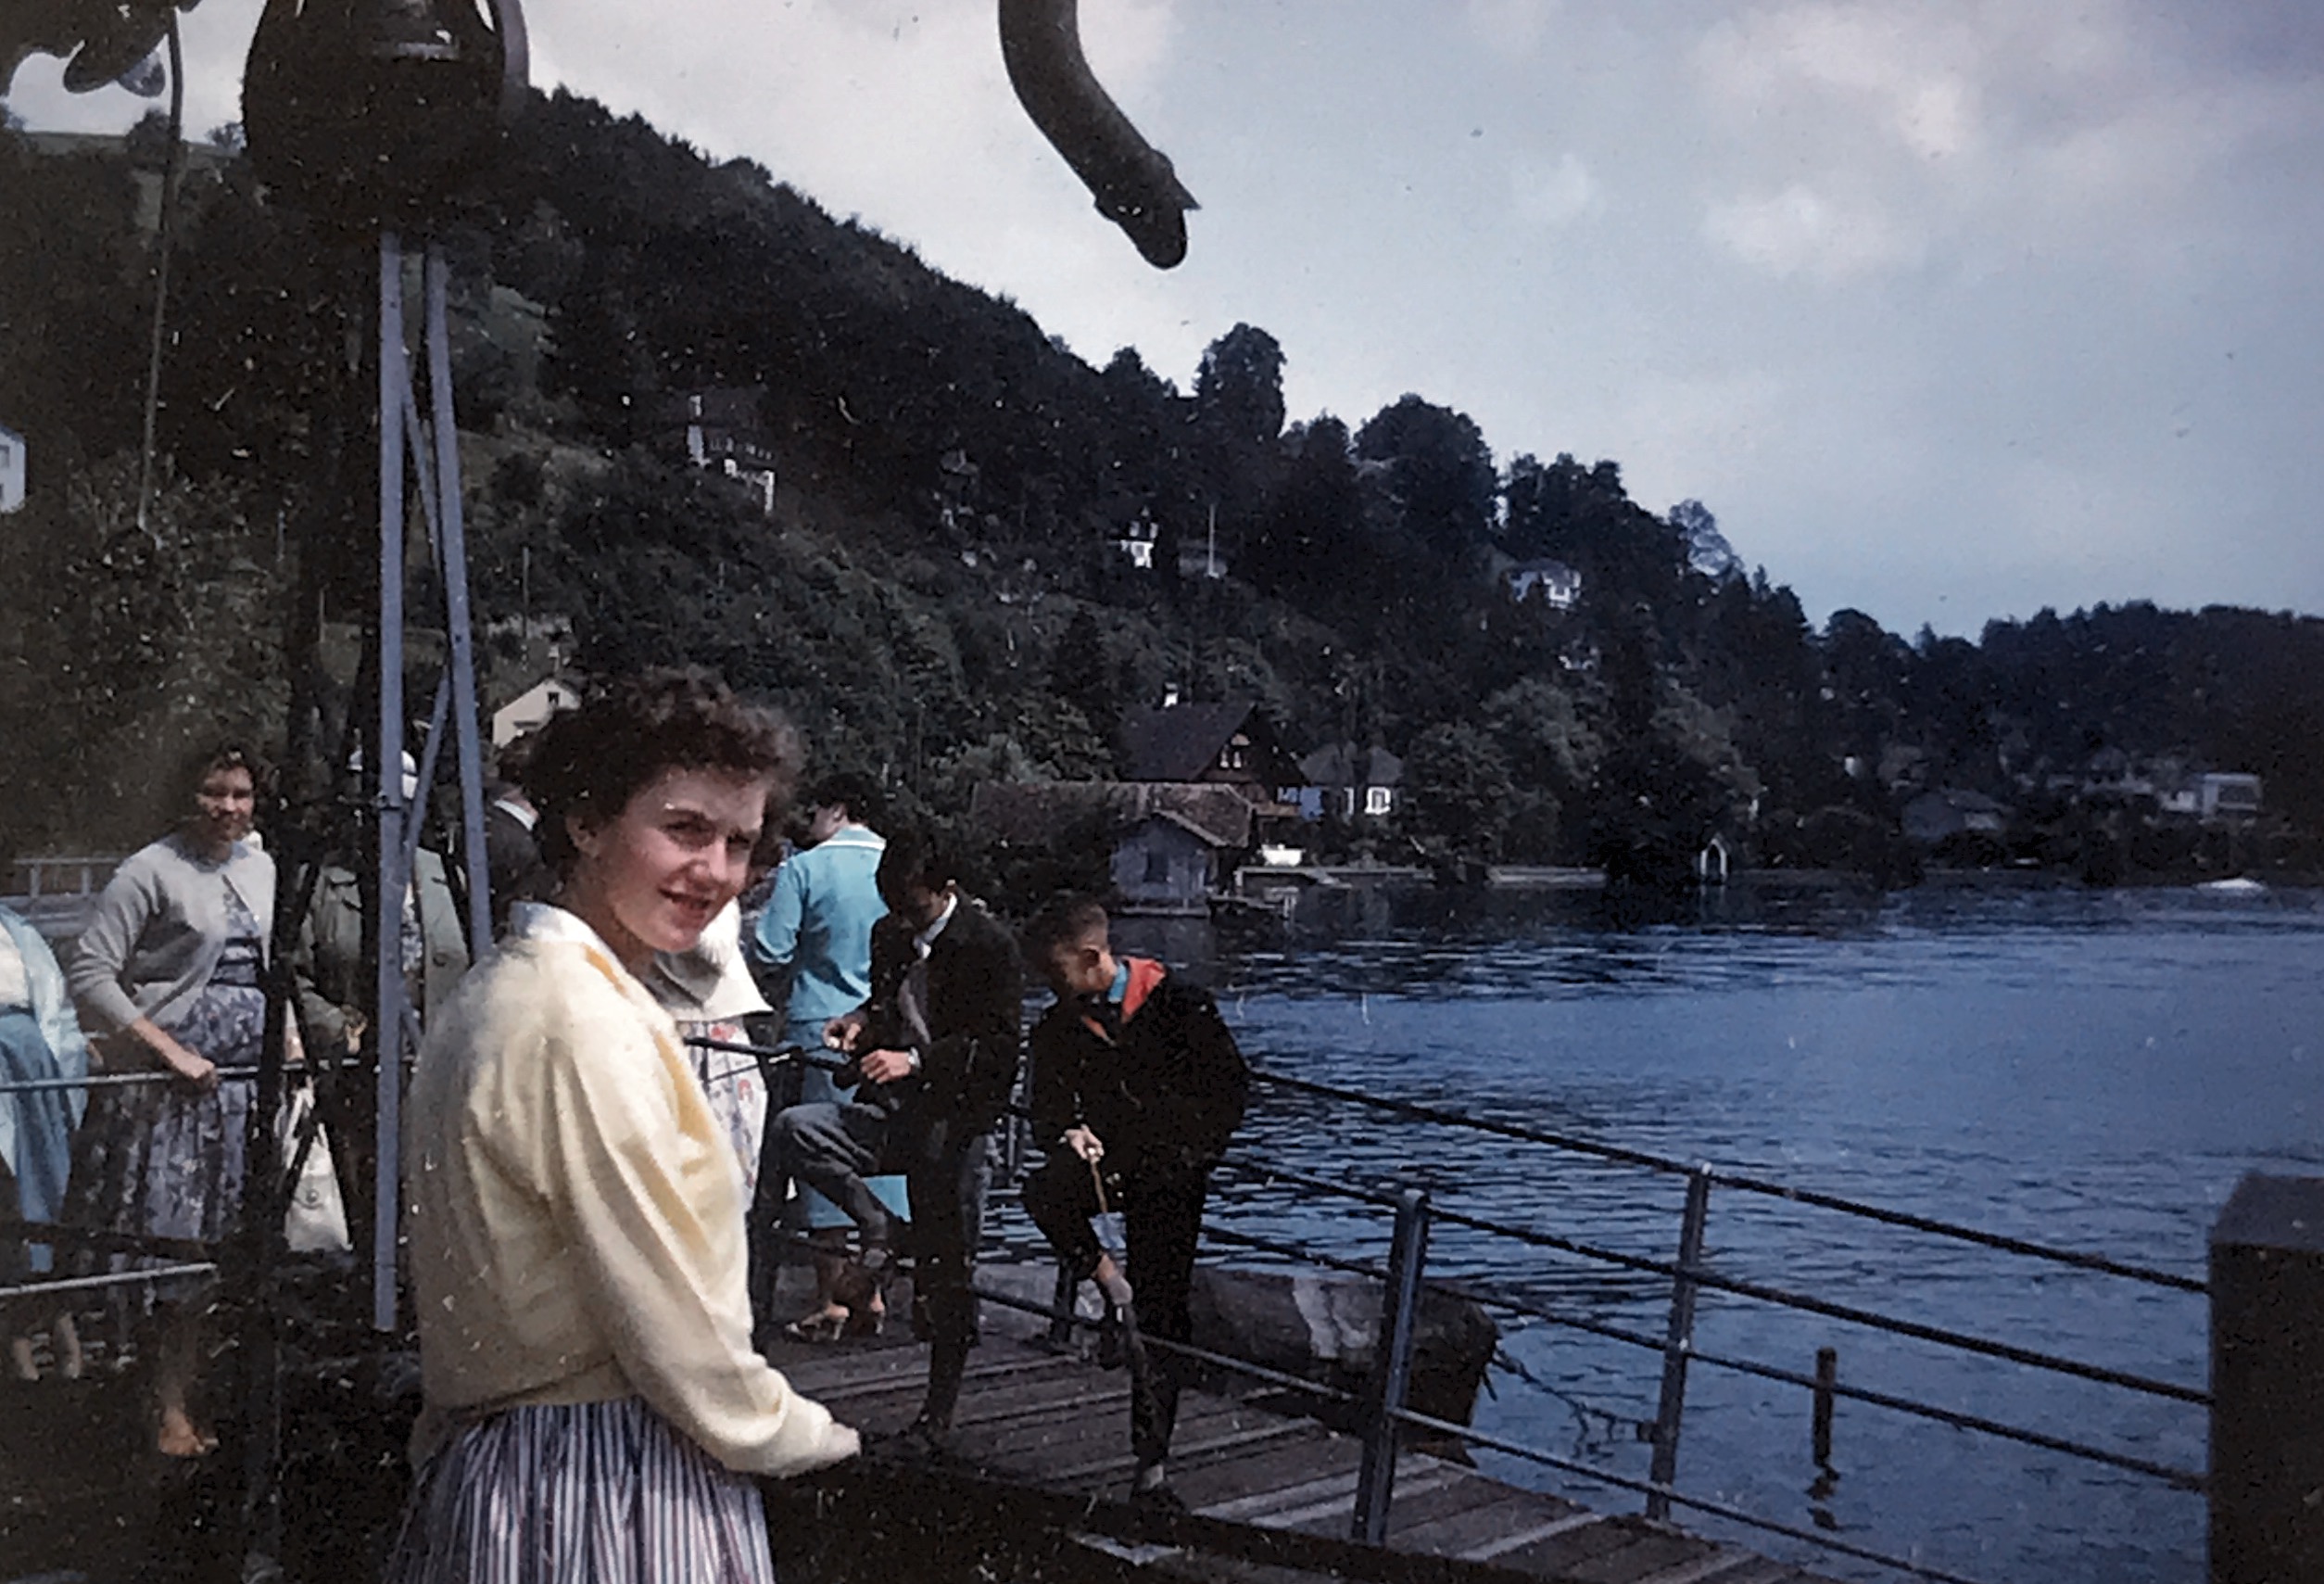 A picture of my mother on her honeymone at Seeburg, Switzerland. 1959. Great to be going through these old slides that have not been looked at in decades!